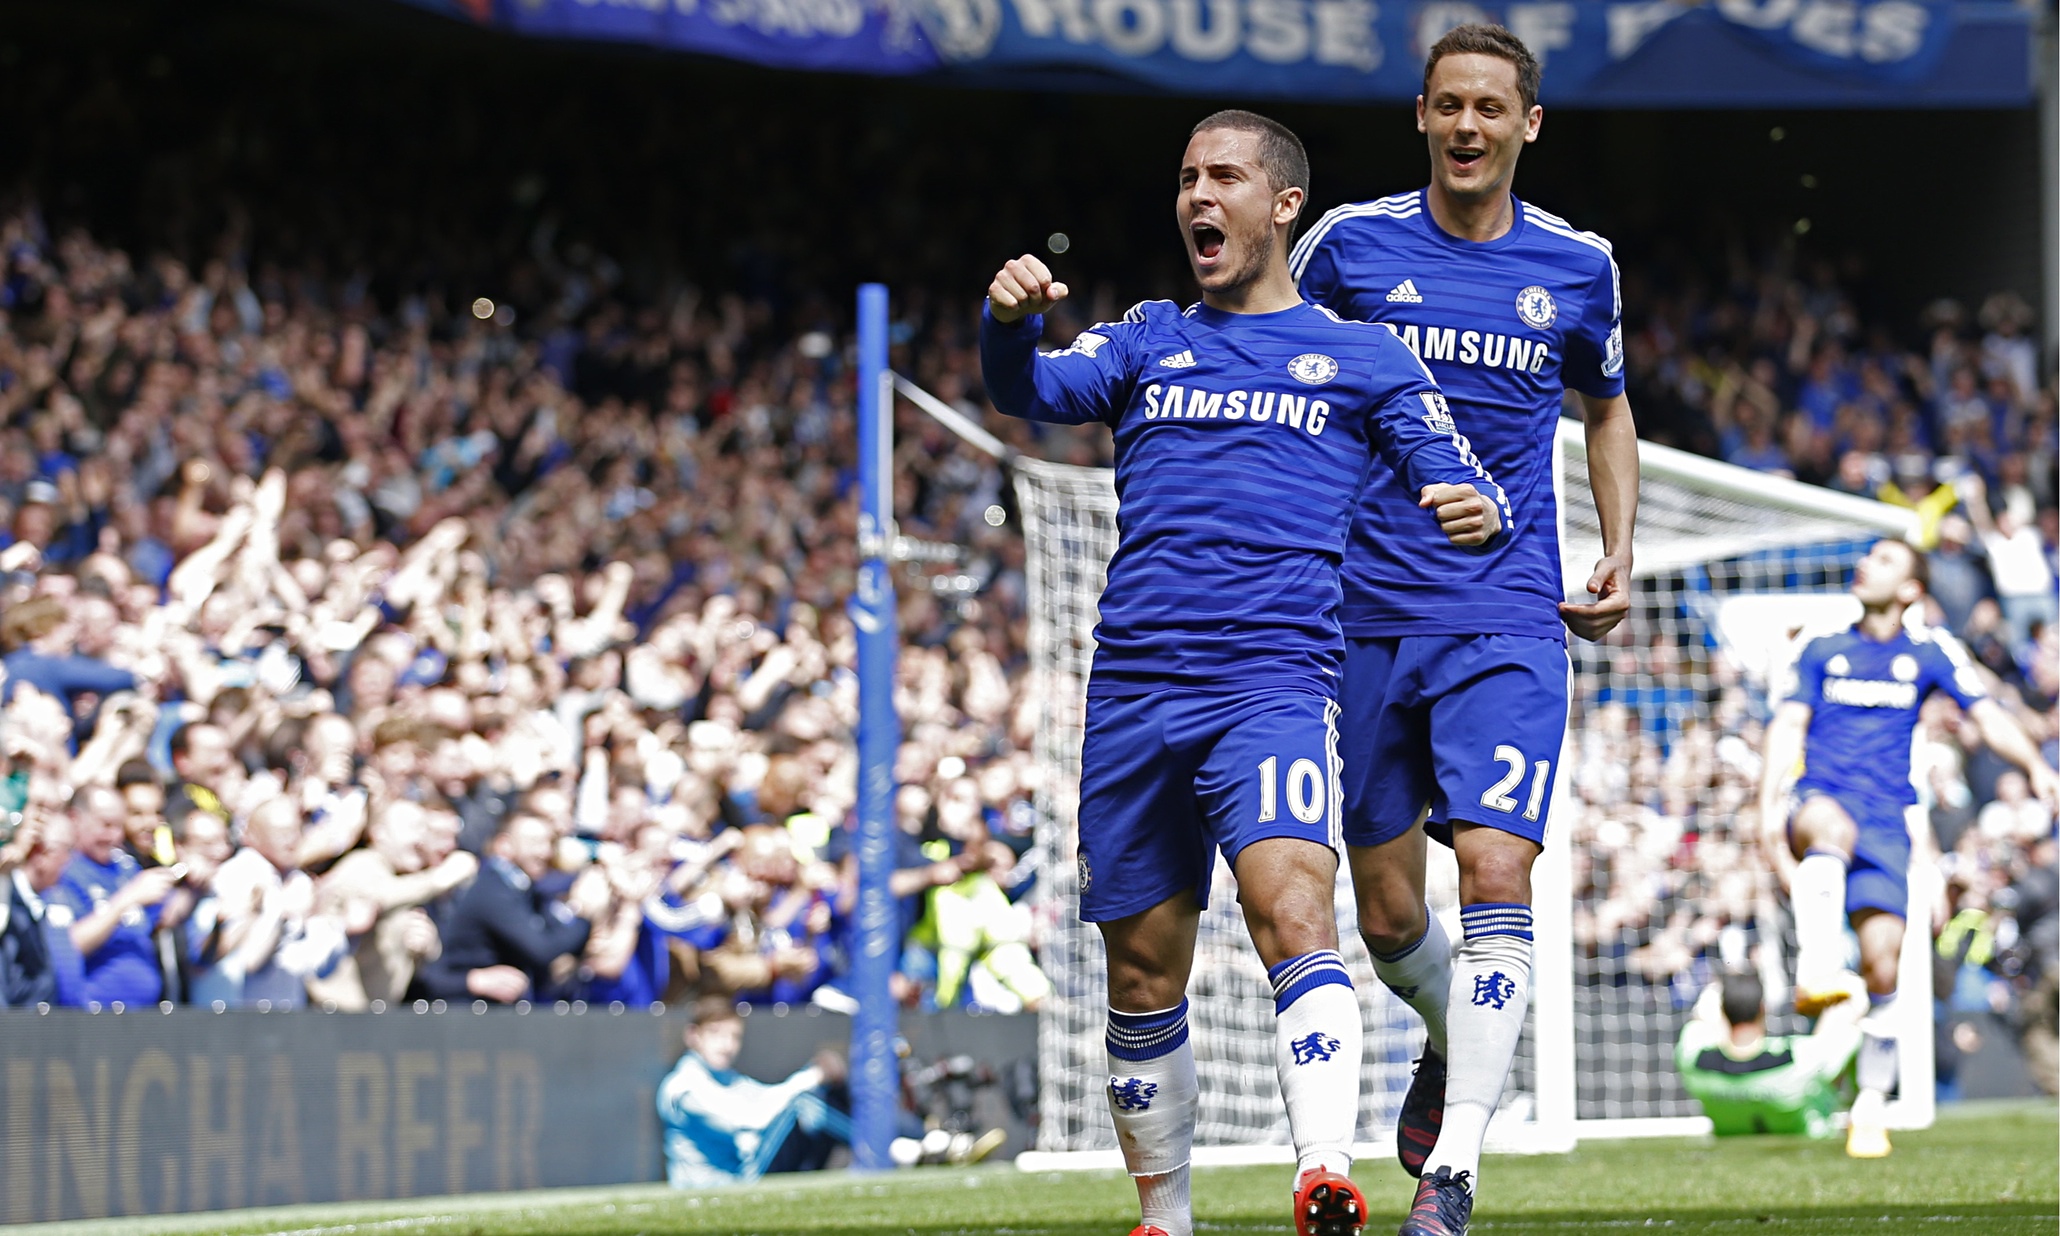 Chelsea 1-0 Crystal Palace | Premier League match report | Football